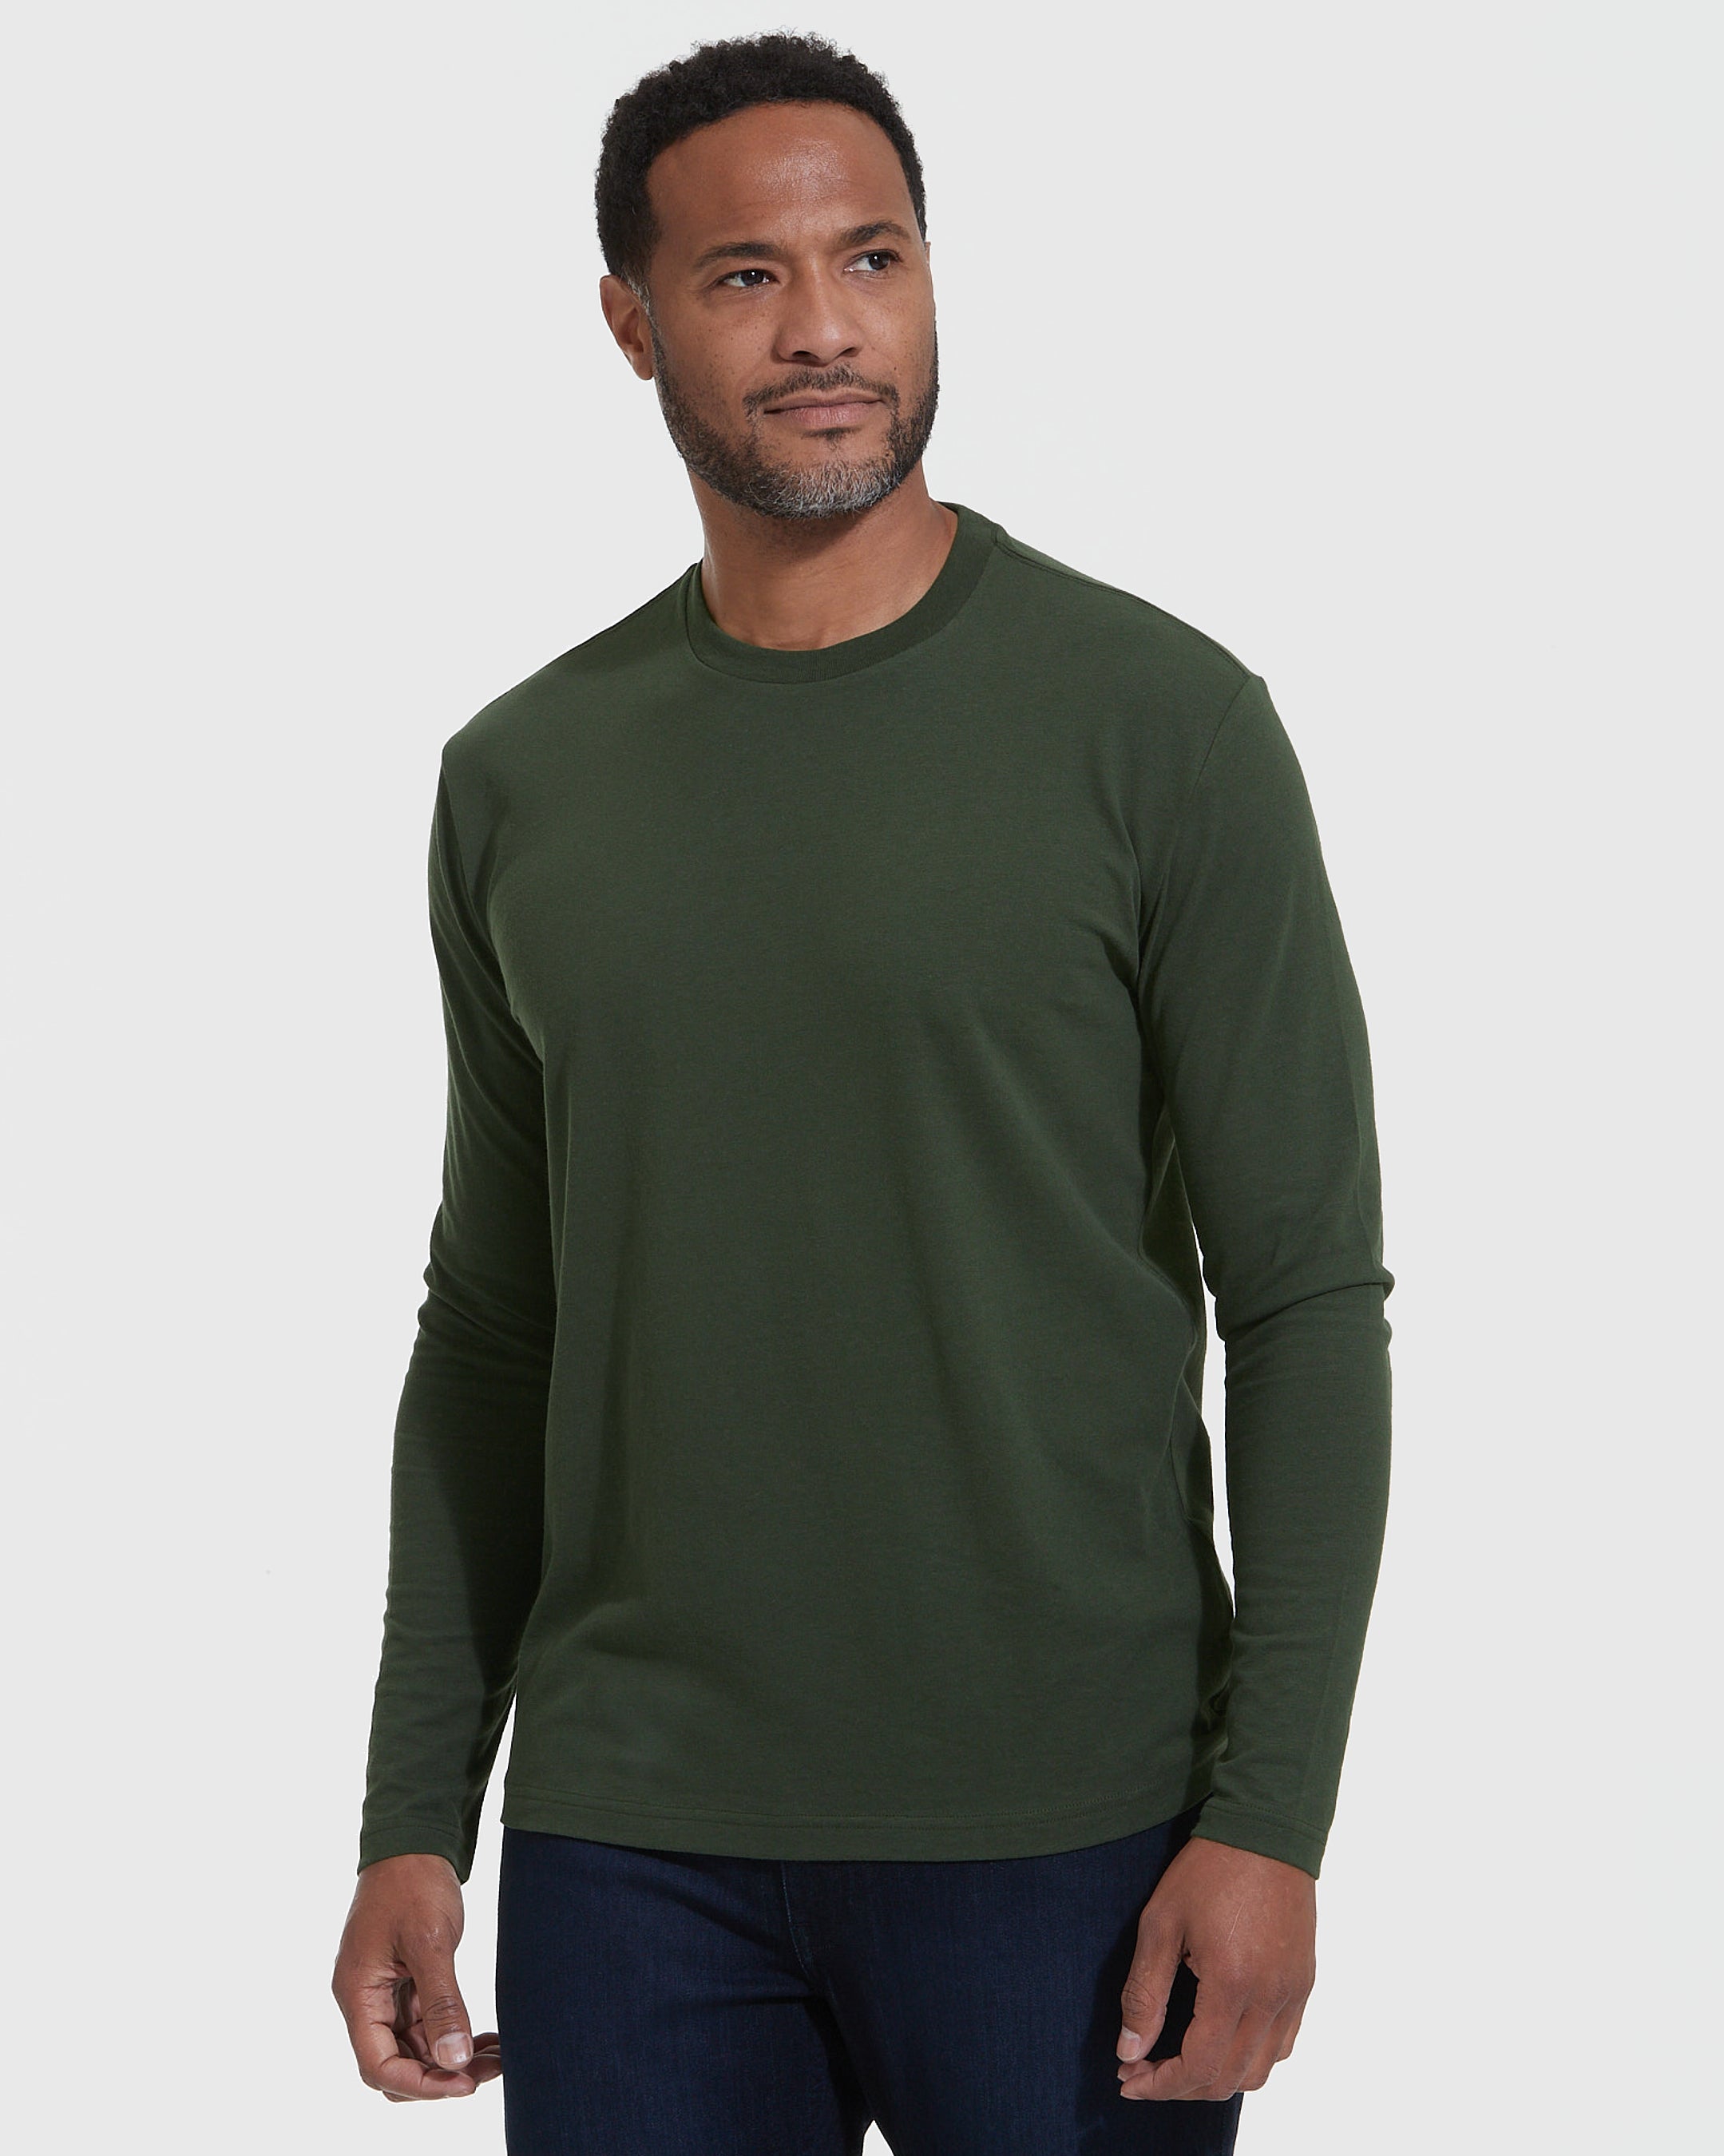 The Perfect Gift Long Sleeve Crew 6-Pack